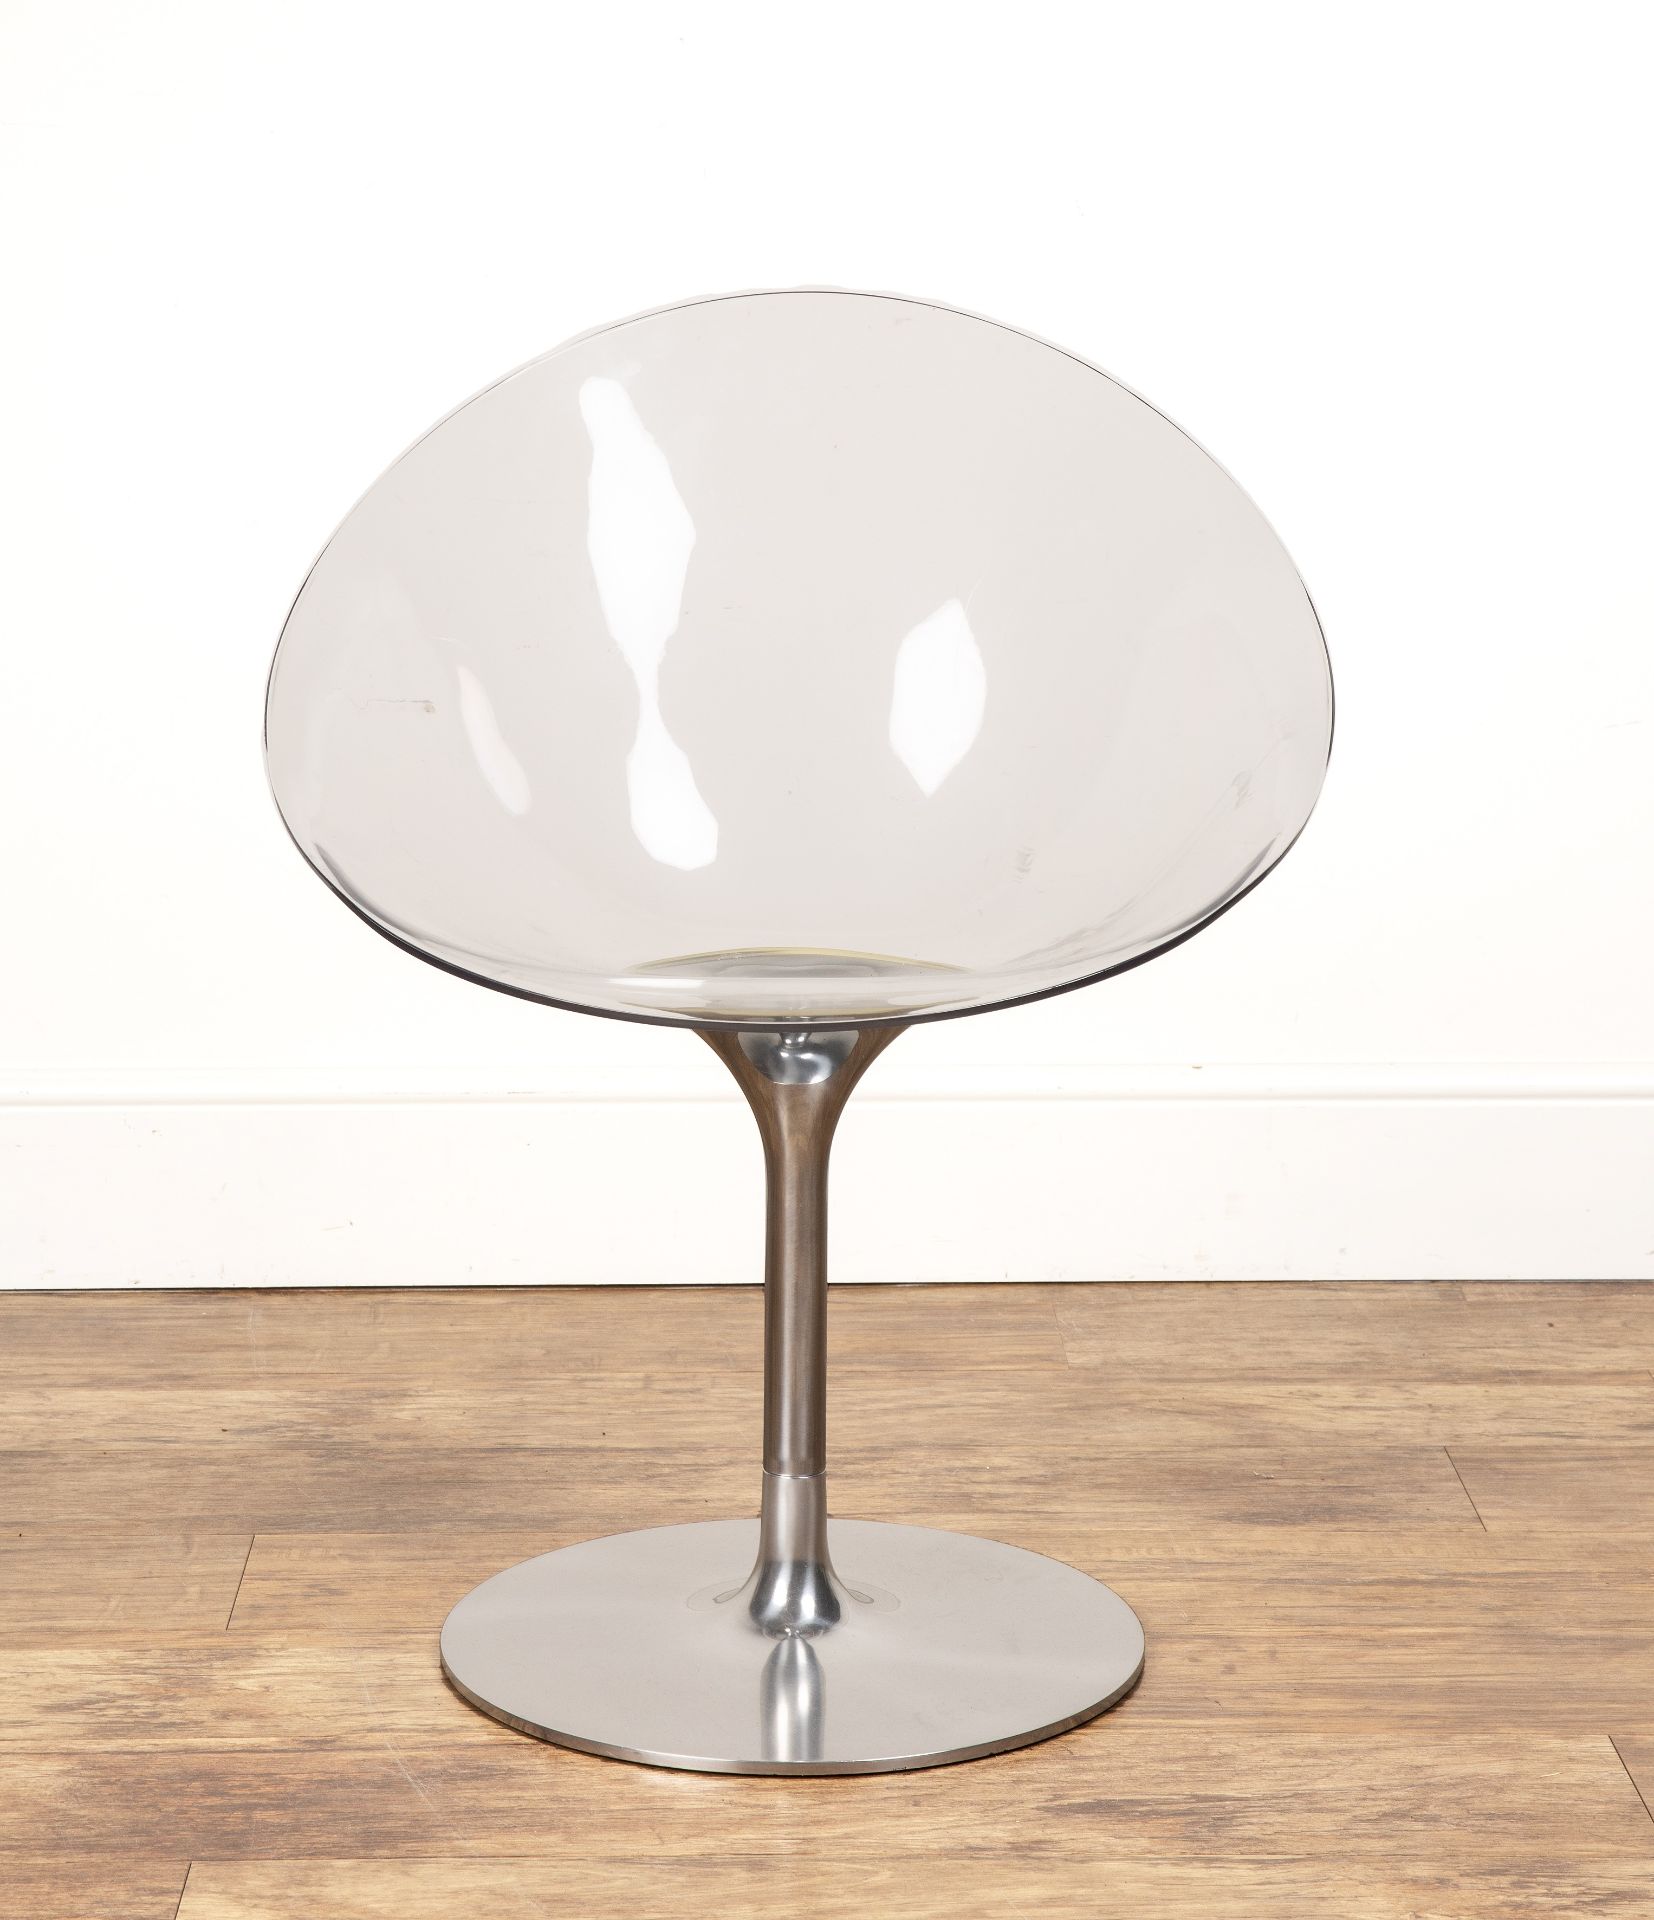 Philippe Starck (b.1949) for Kartell 'Eros' swivel chair, perspex on aluminium base, with etched - Image 2 of 5